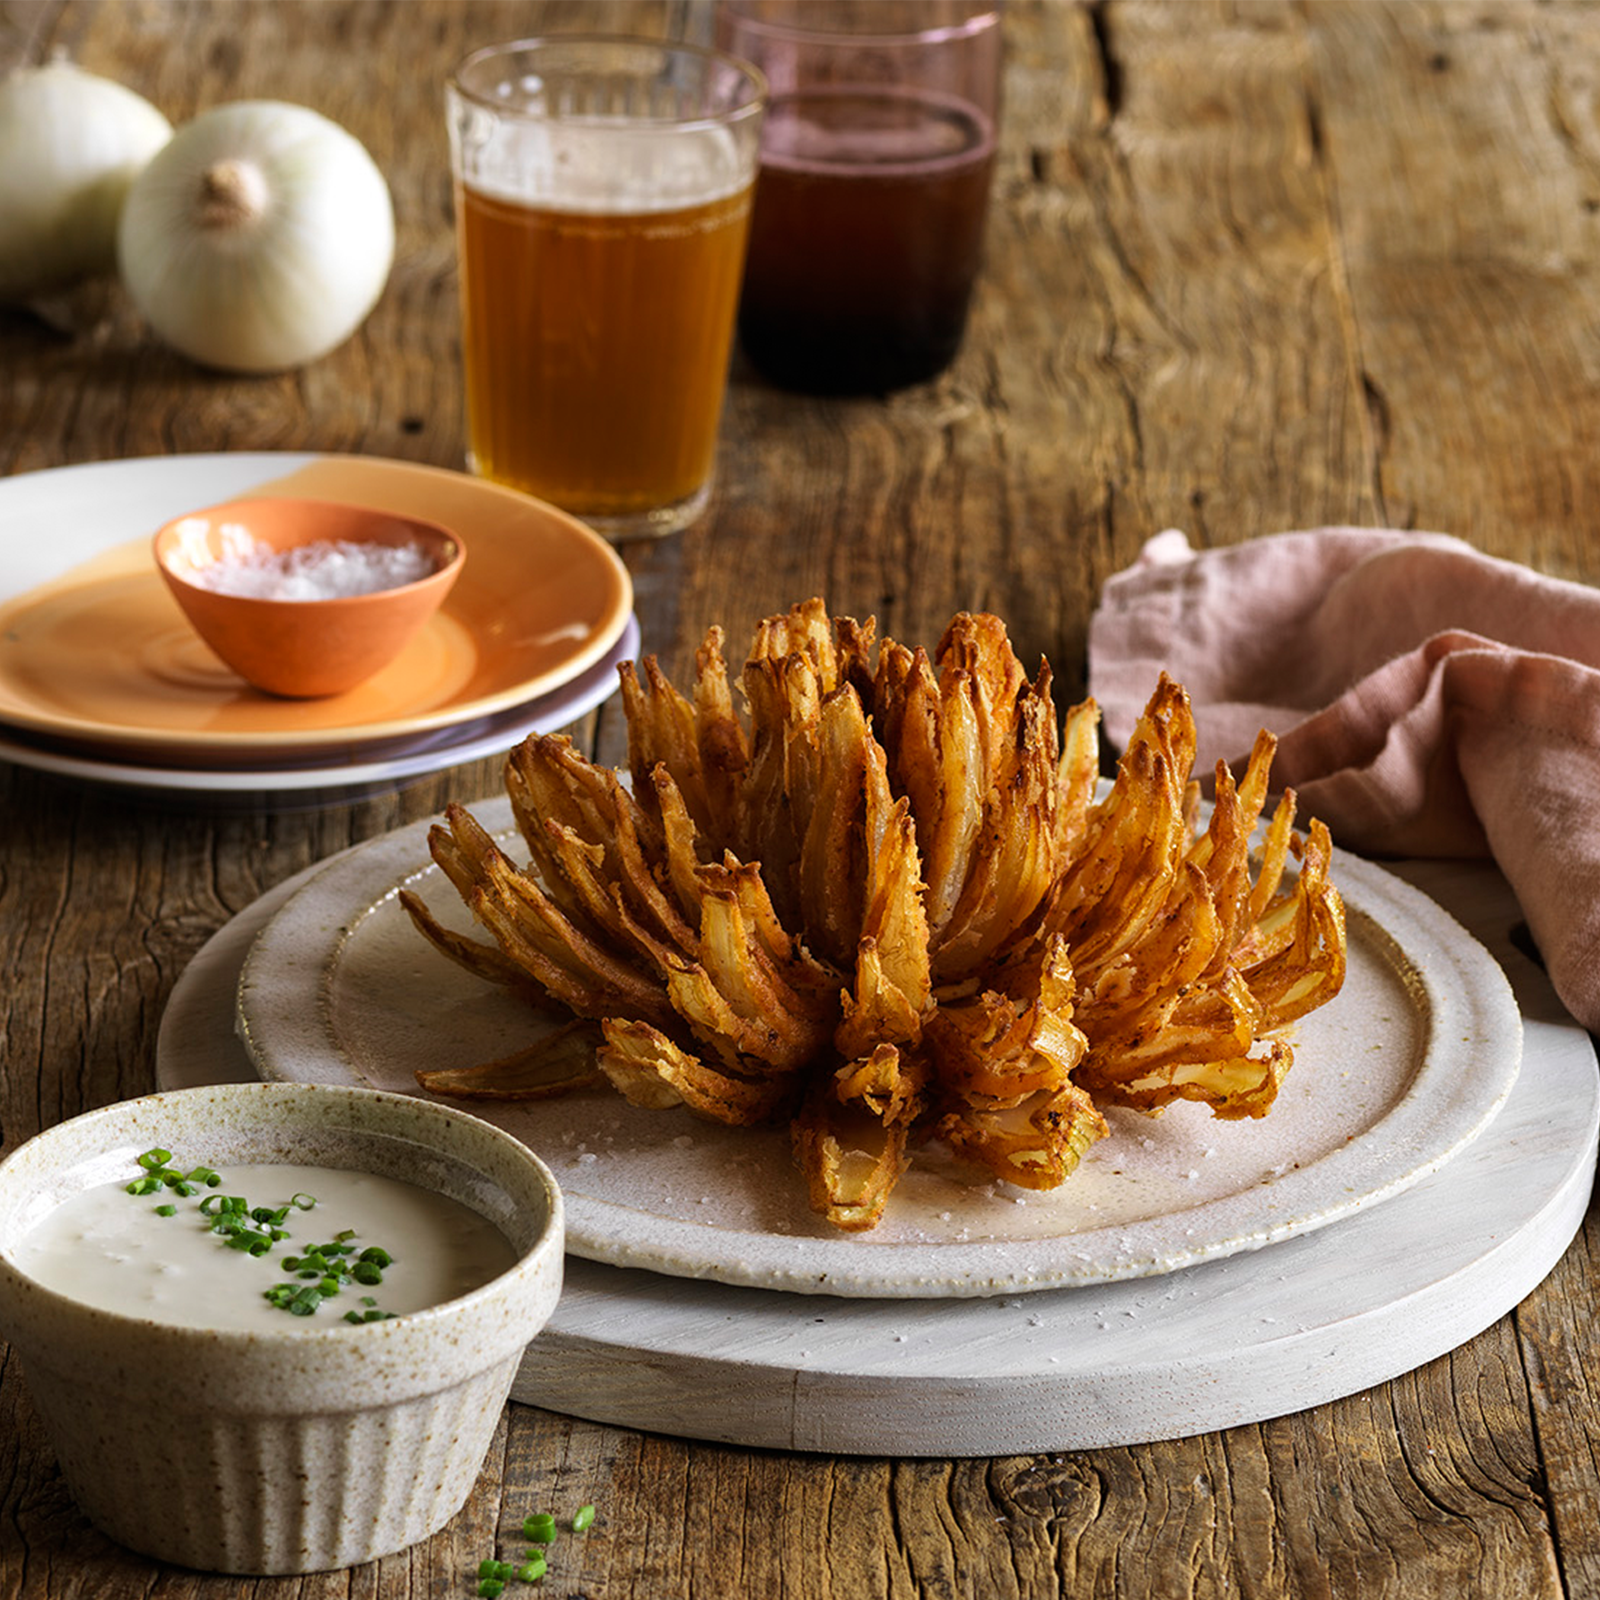 A blooming onion sits on a white plate. In front of the plate is a small bowl with blue cheese tip garnished with fresh herbs. A schooner of gluten-free beer sits at the back.